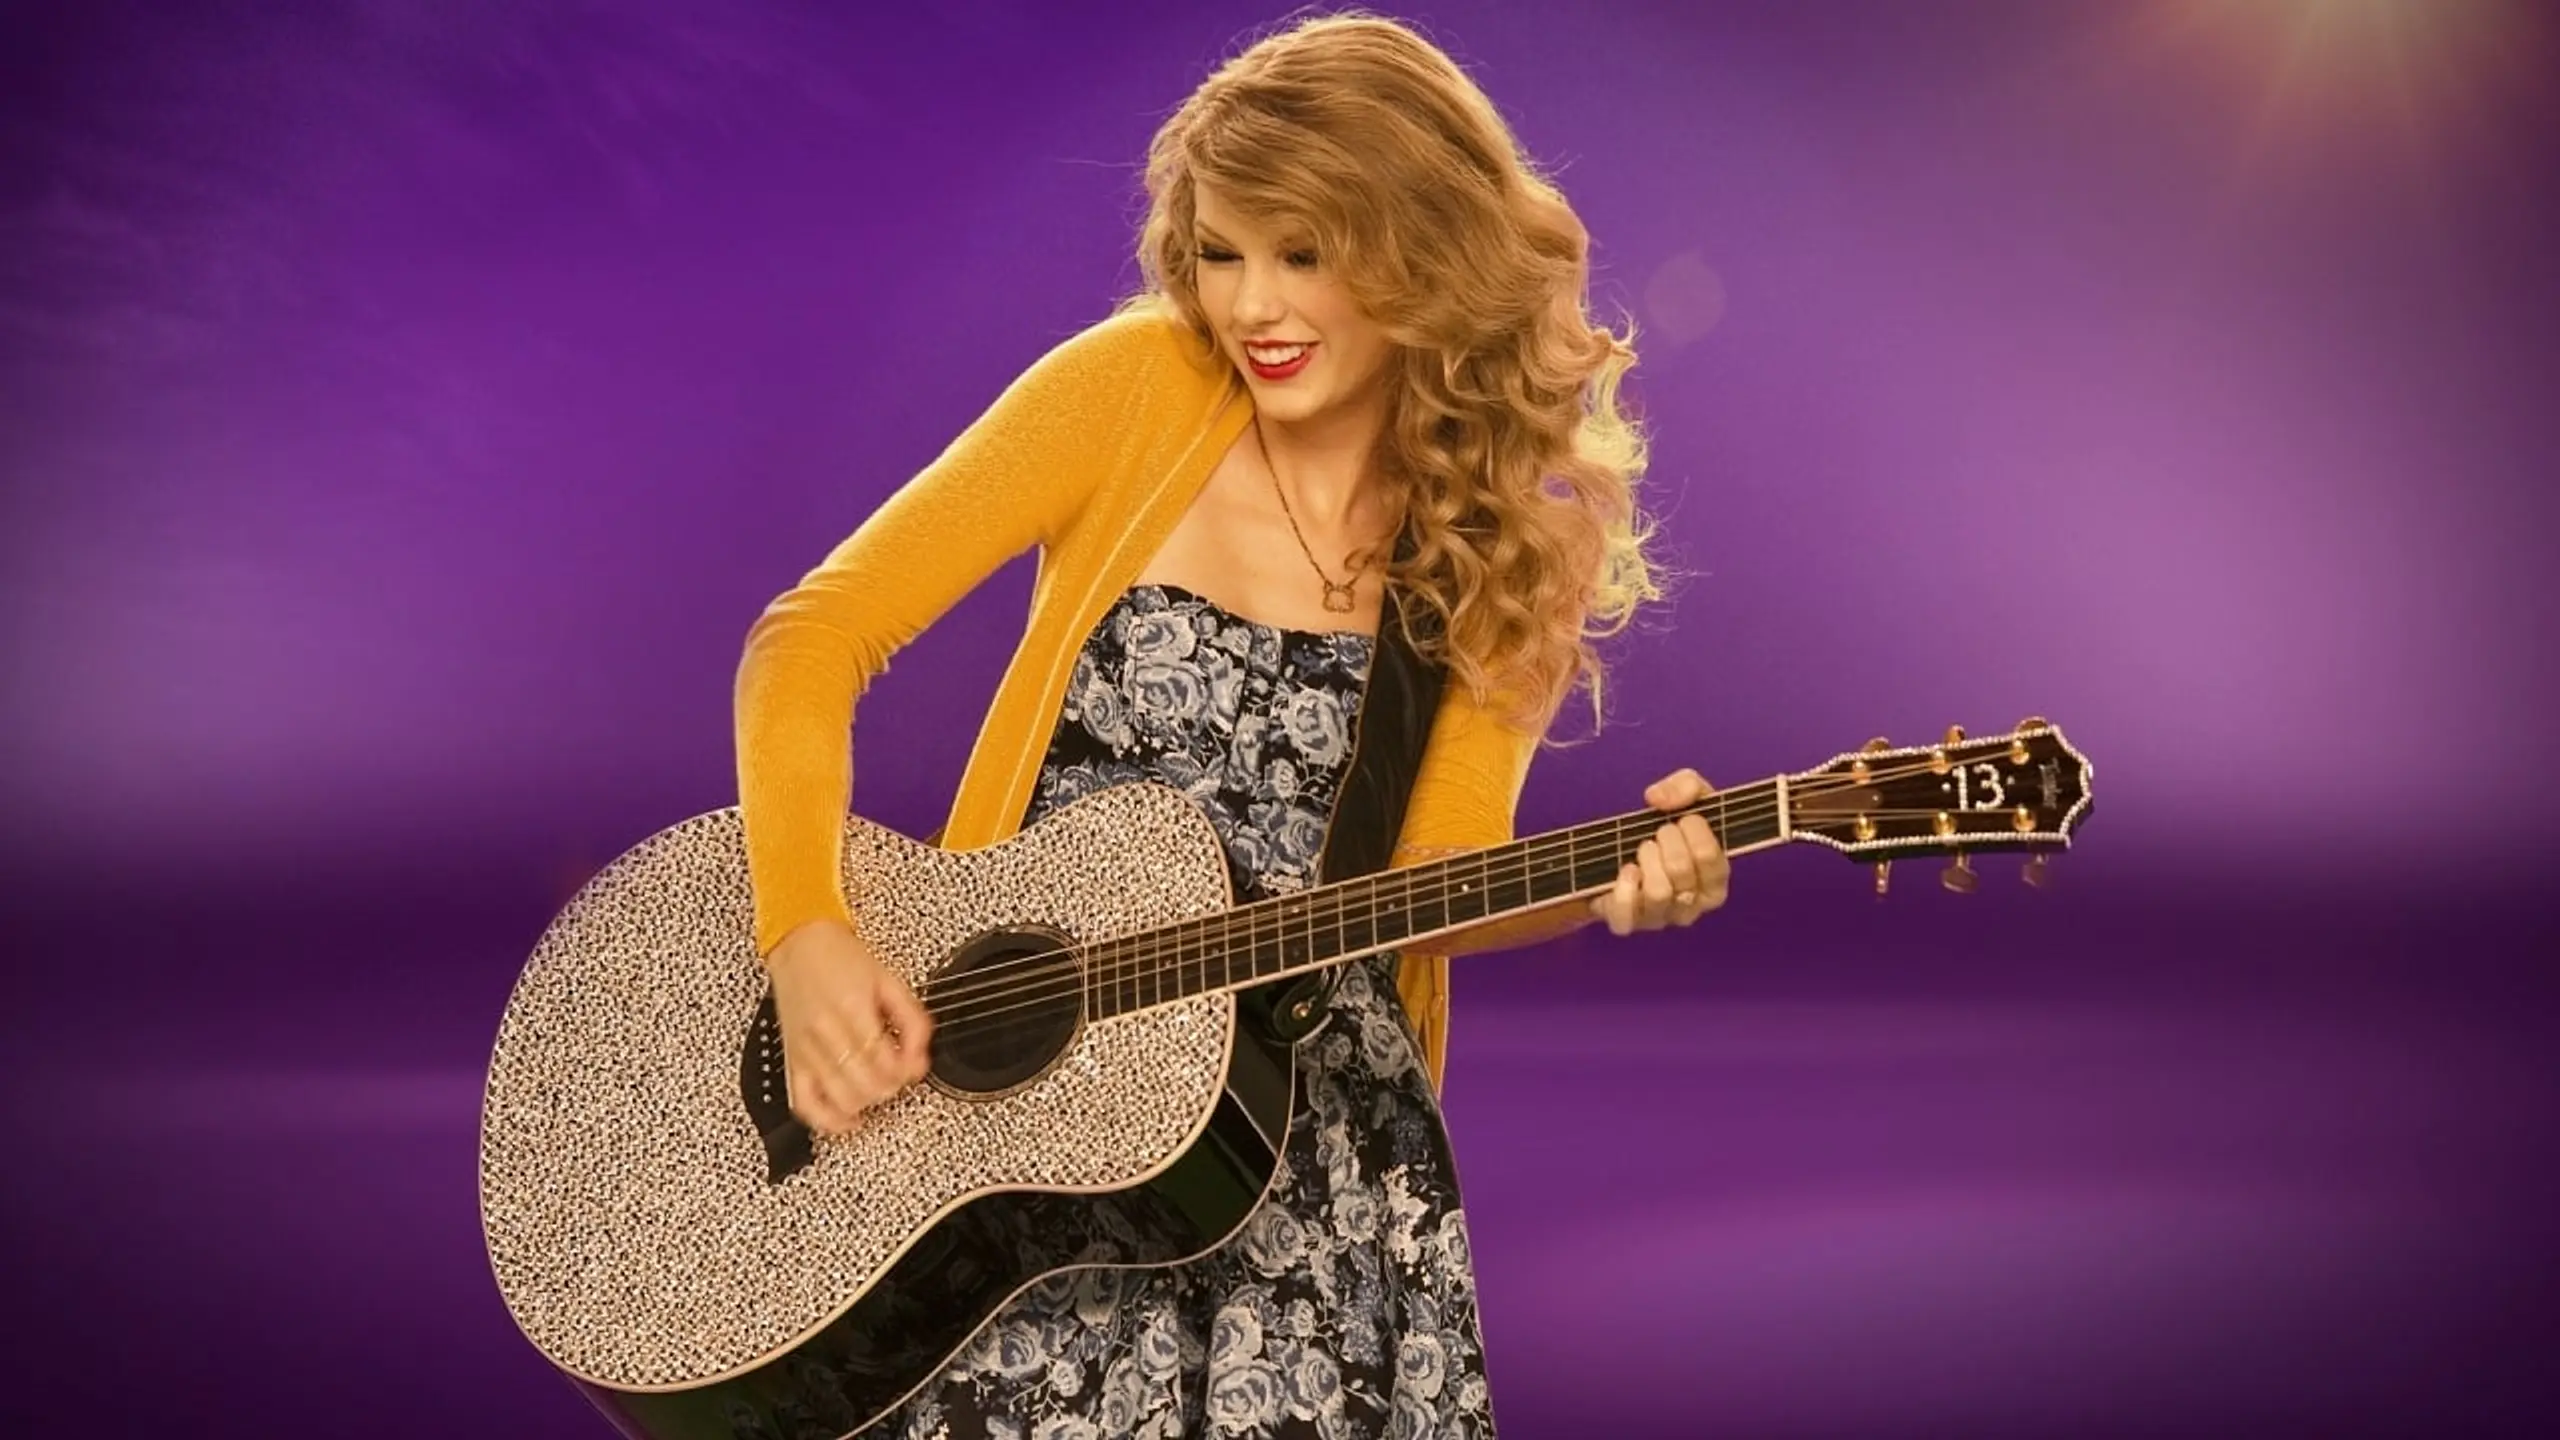 Taylor Swift: Journey to Fearless